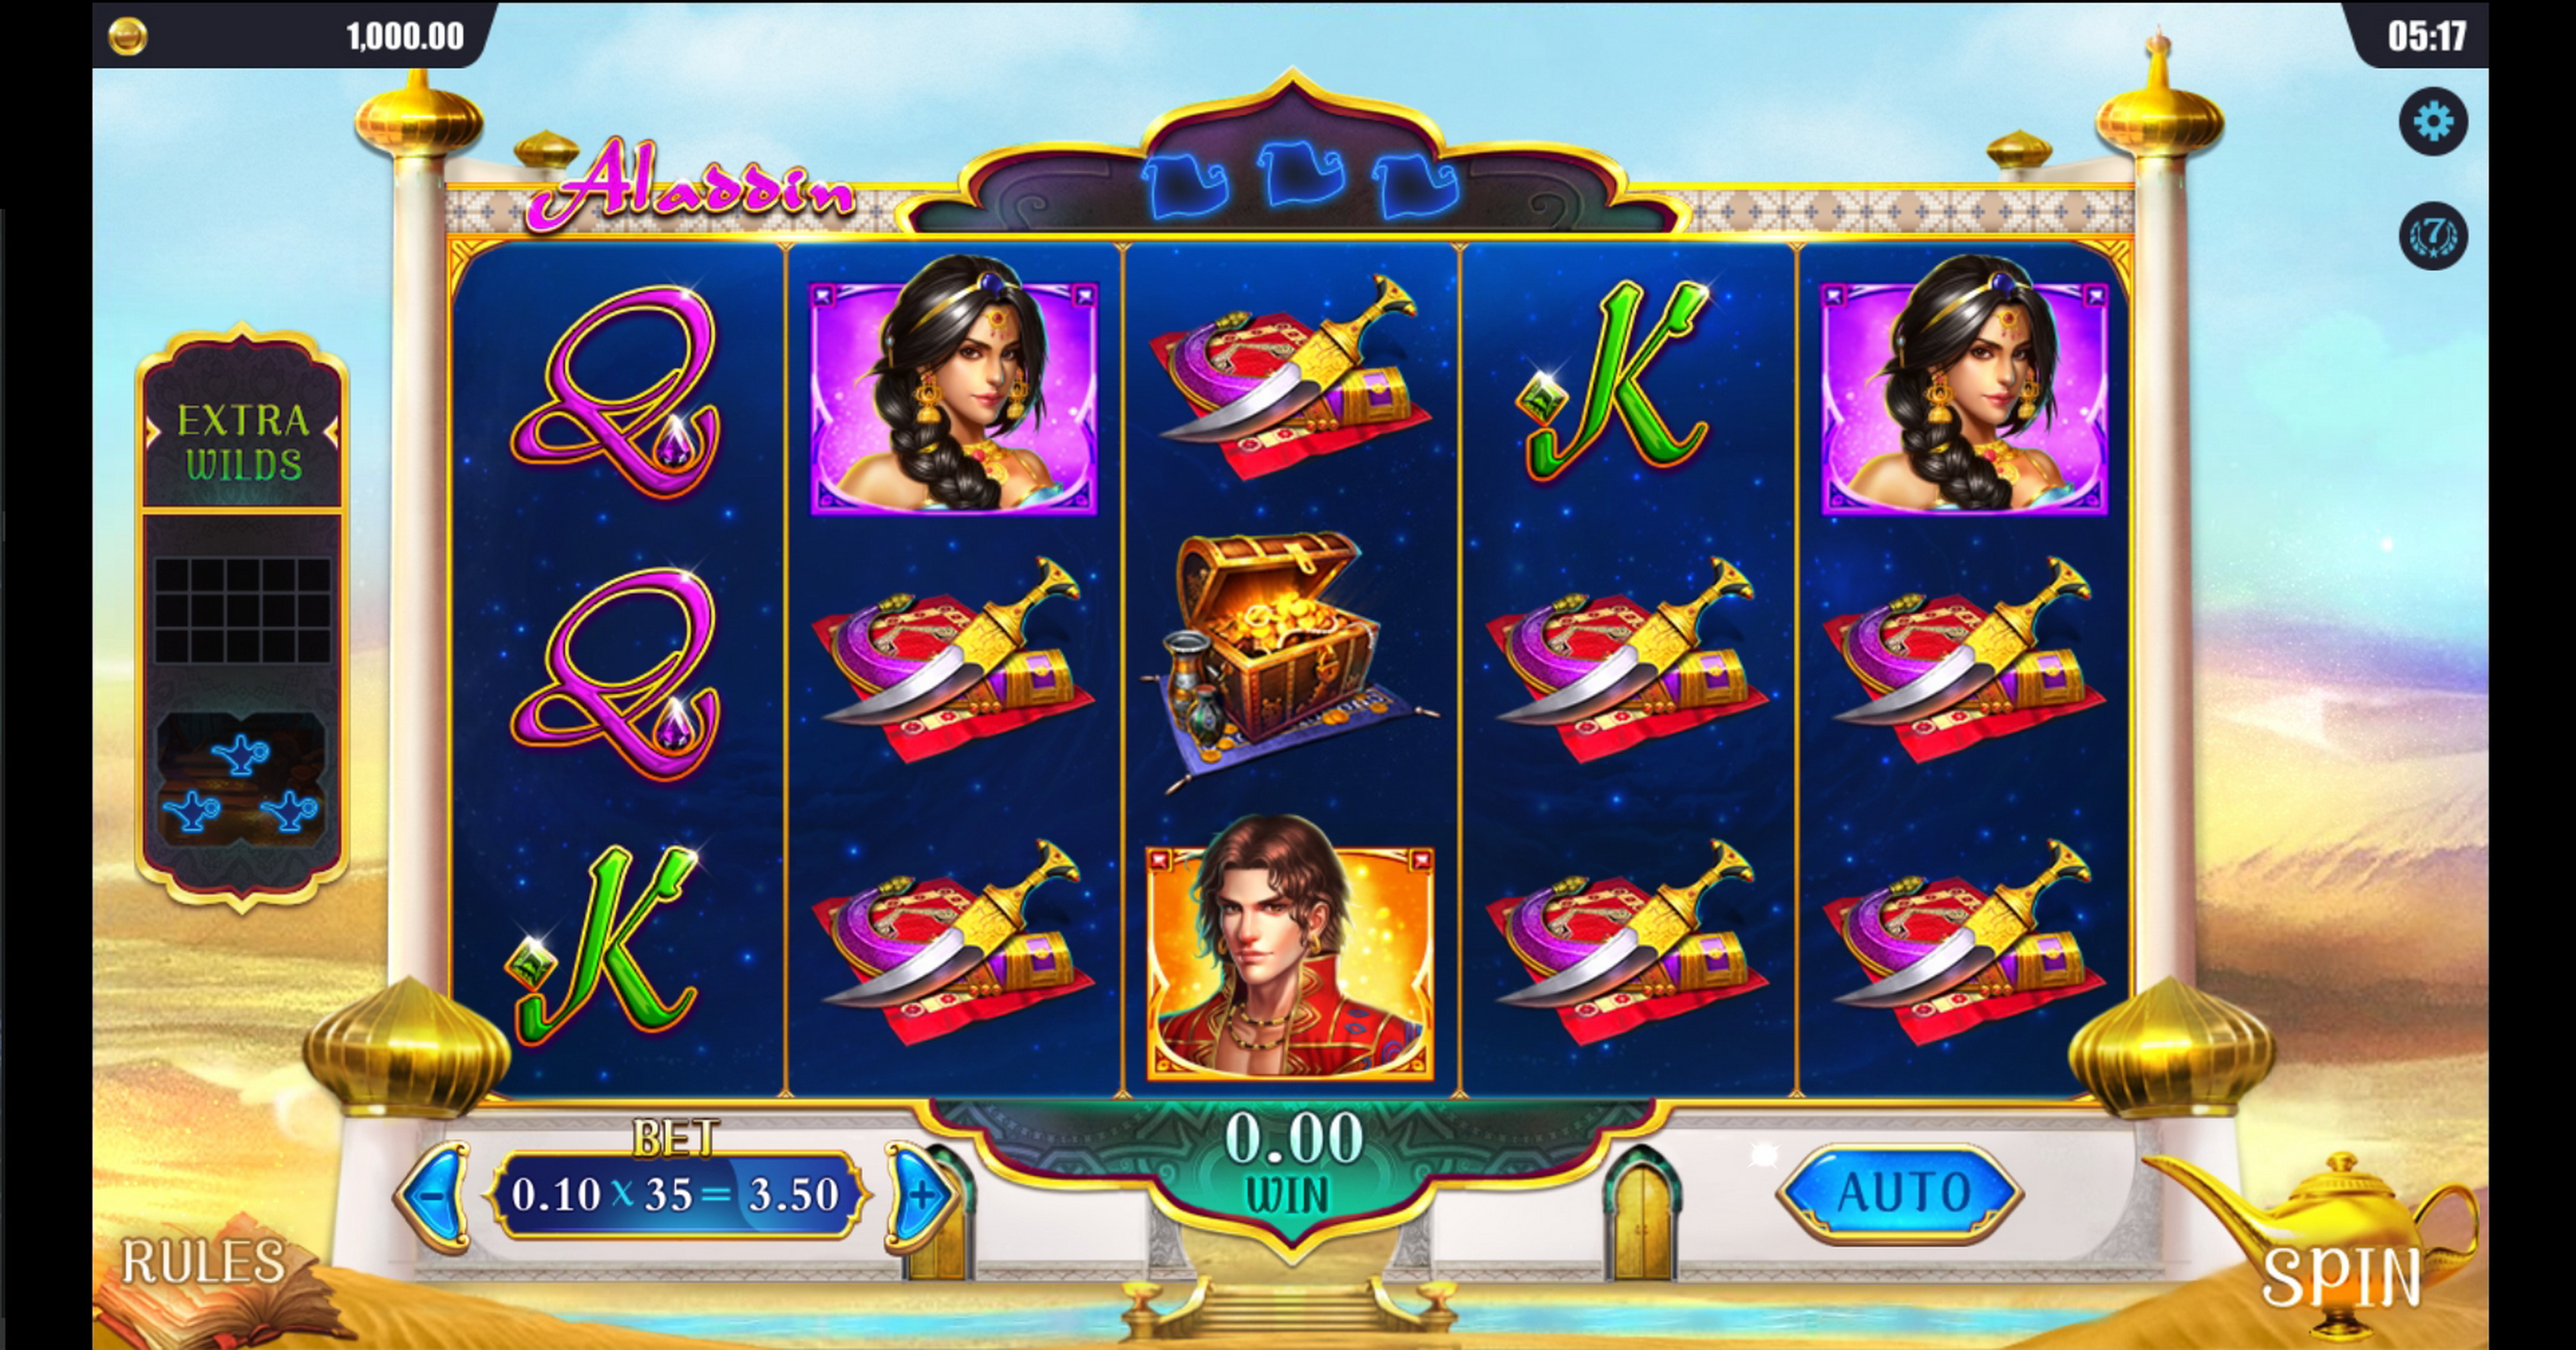 Reels in Aladdins Wish Slot Game by Dreamtech Gaming